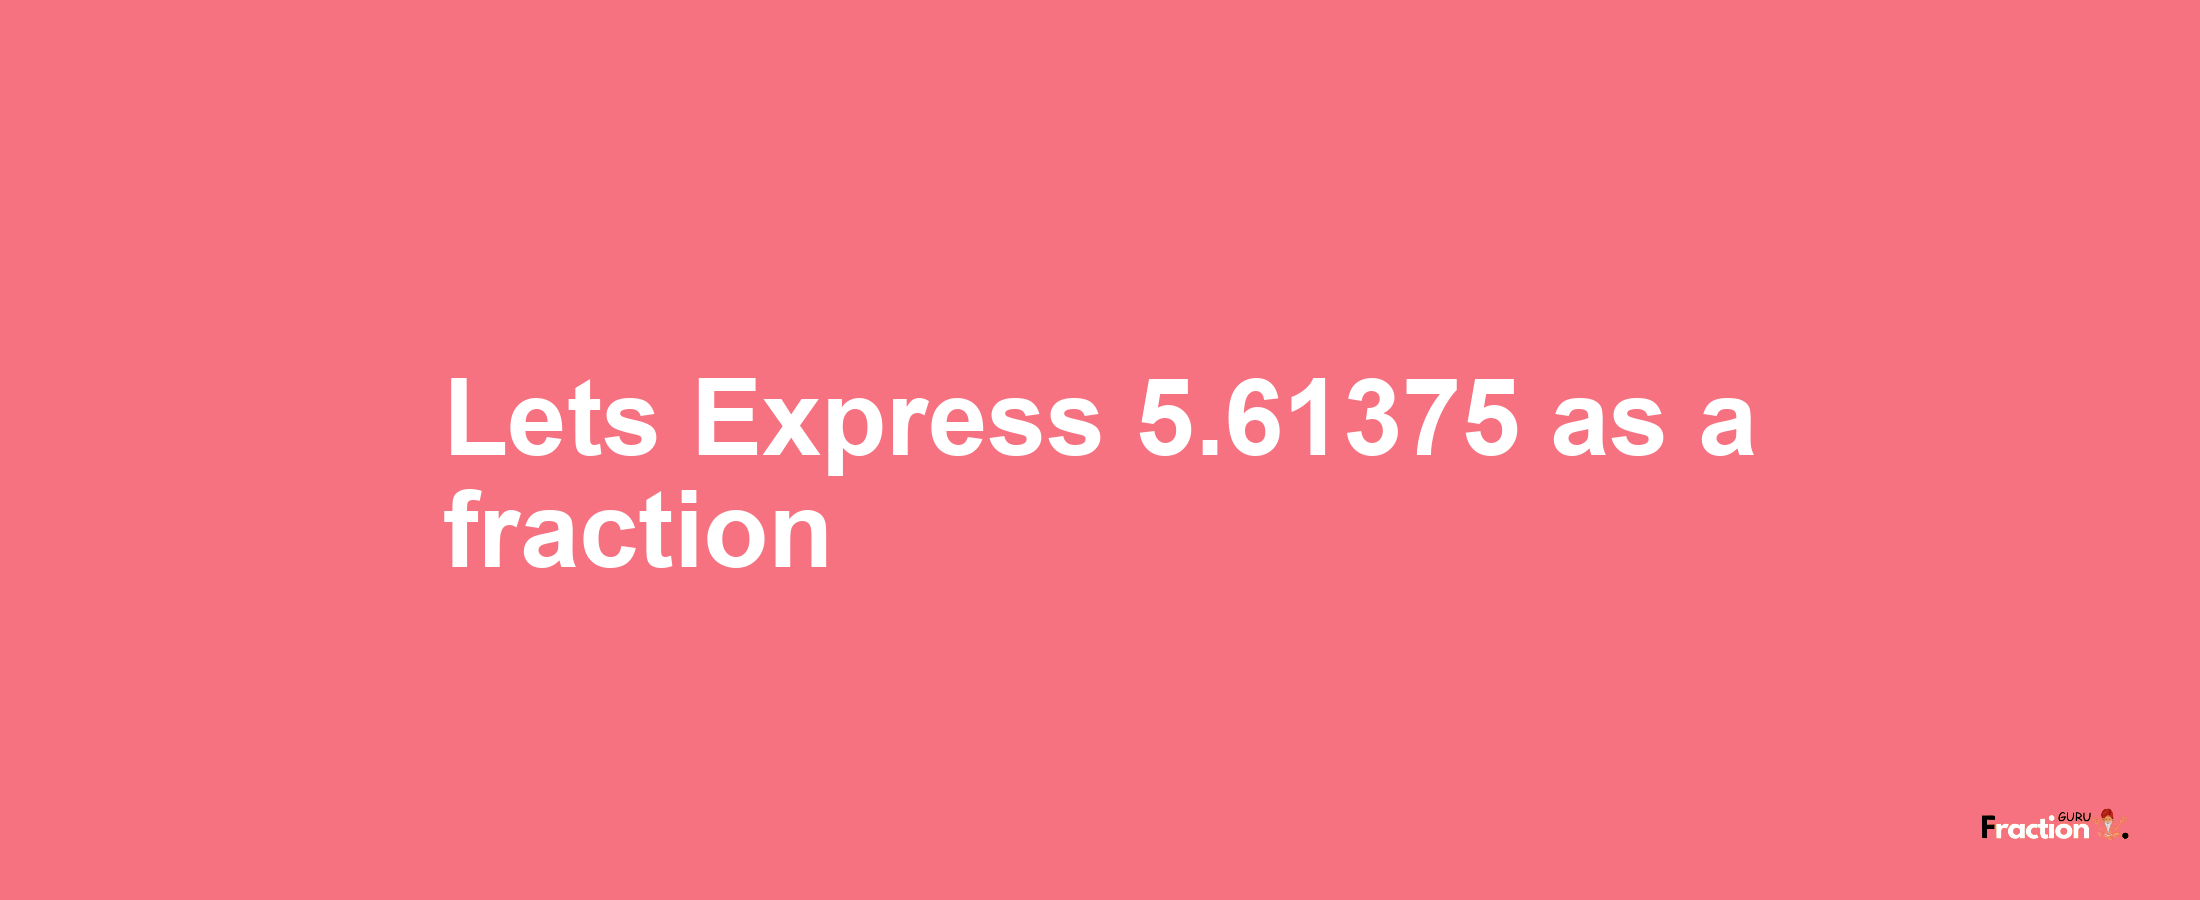 Lets Express 5.61375 as afraction